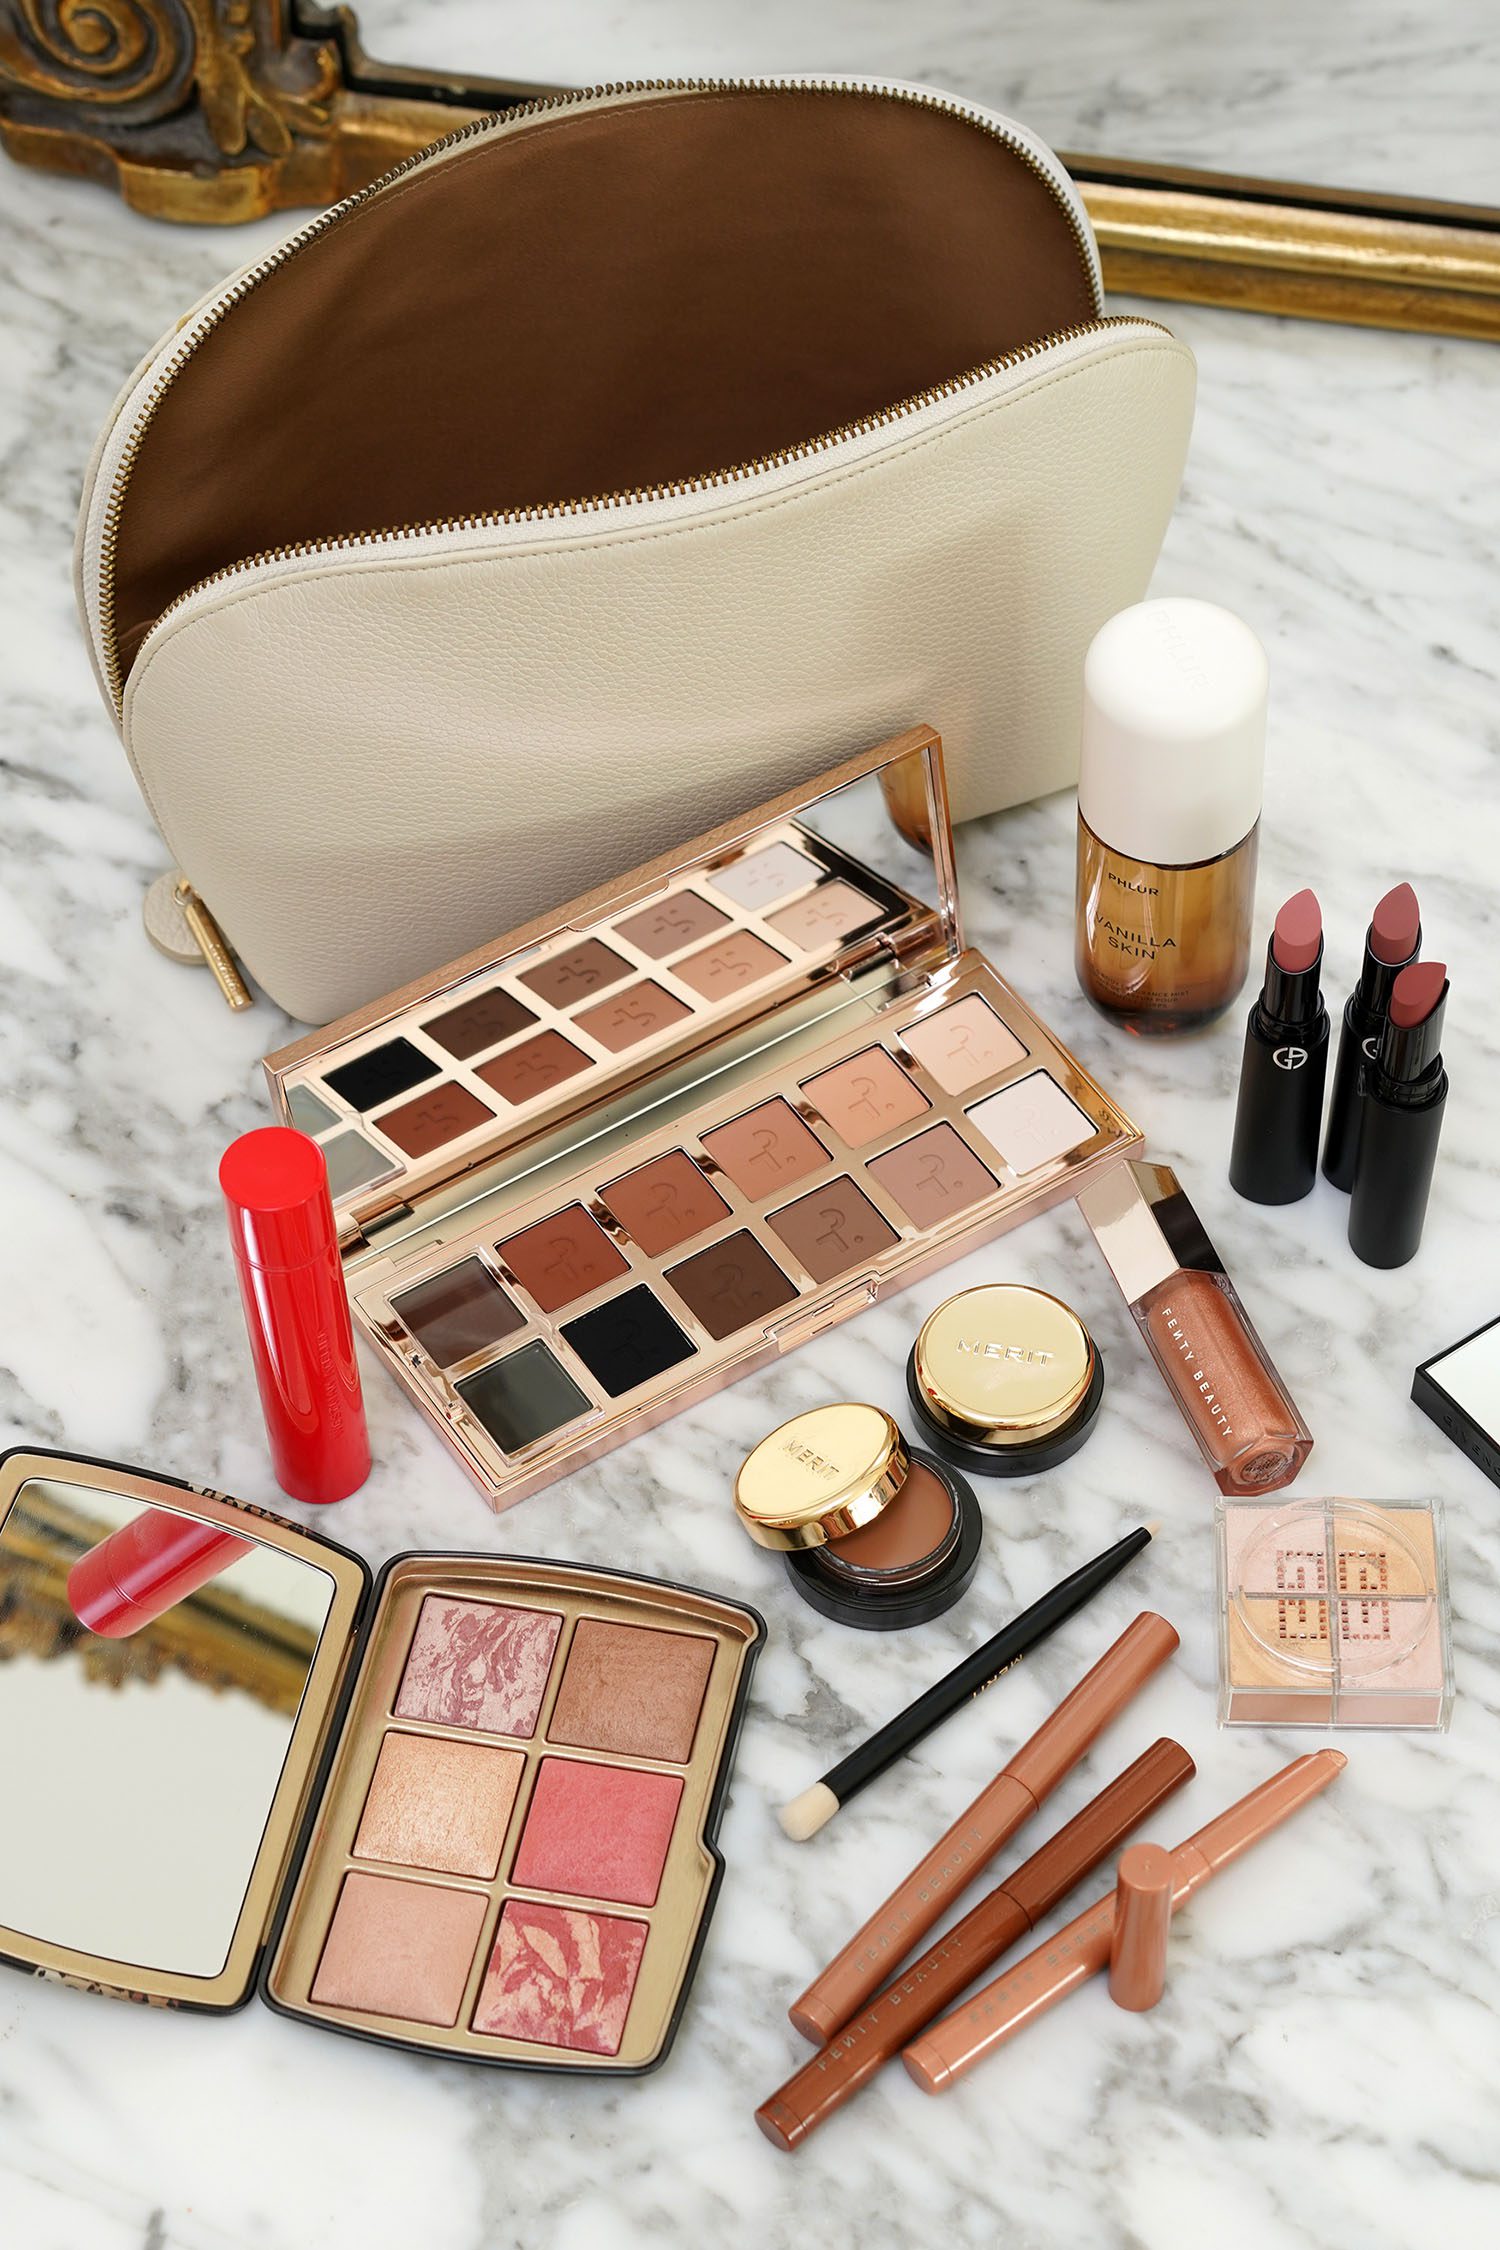 Fall Beauty Must-Haves from Sephora - The Beauty Look Book